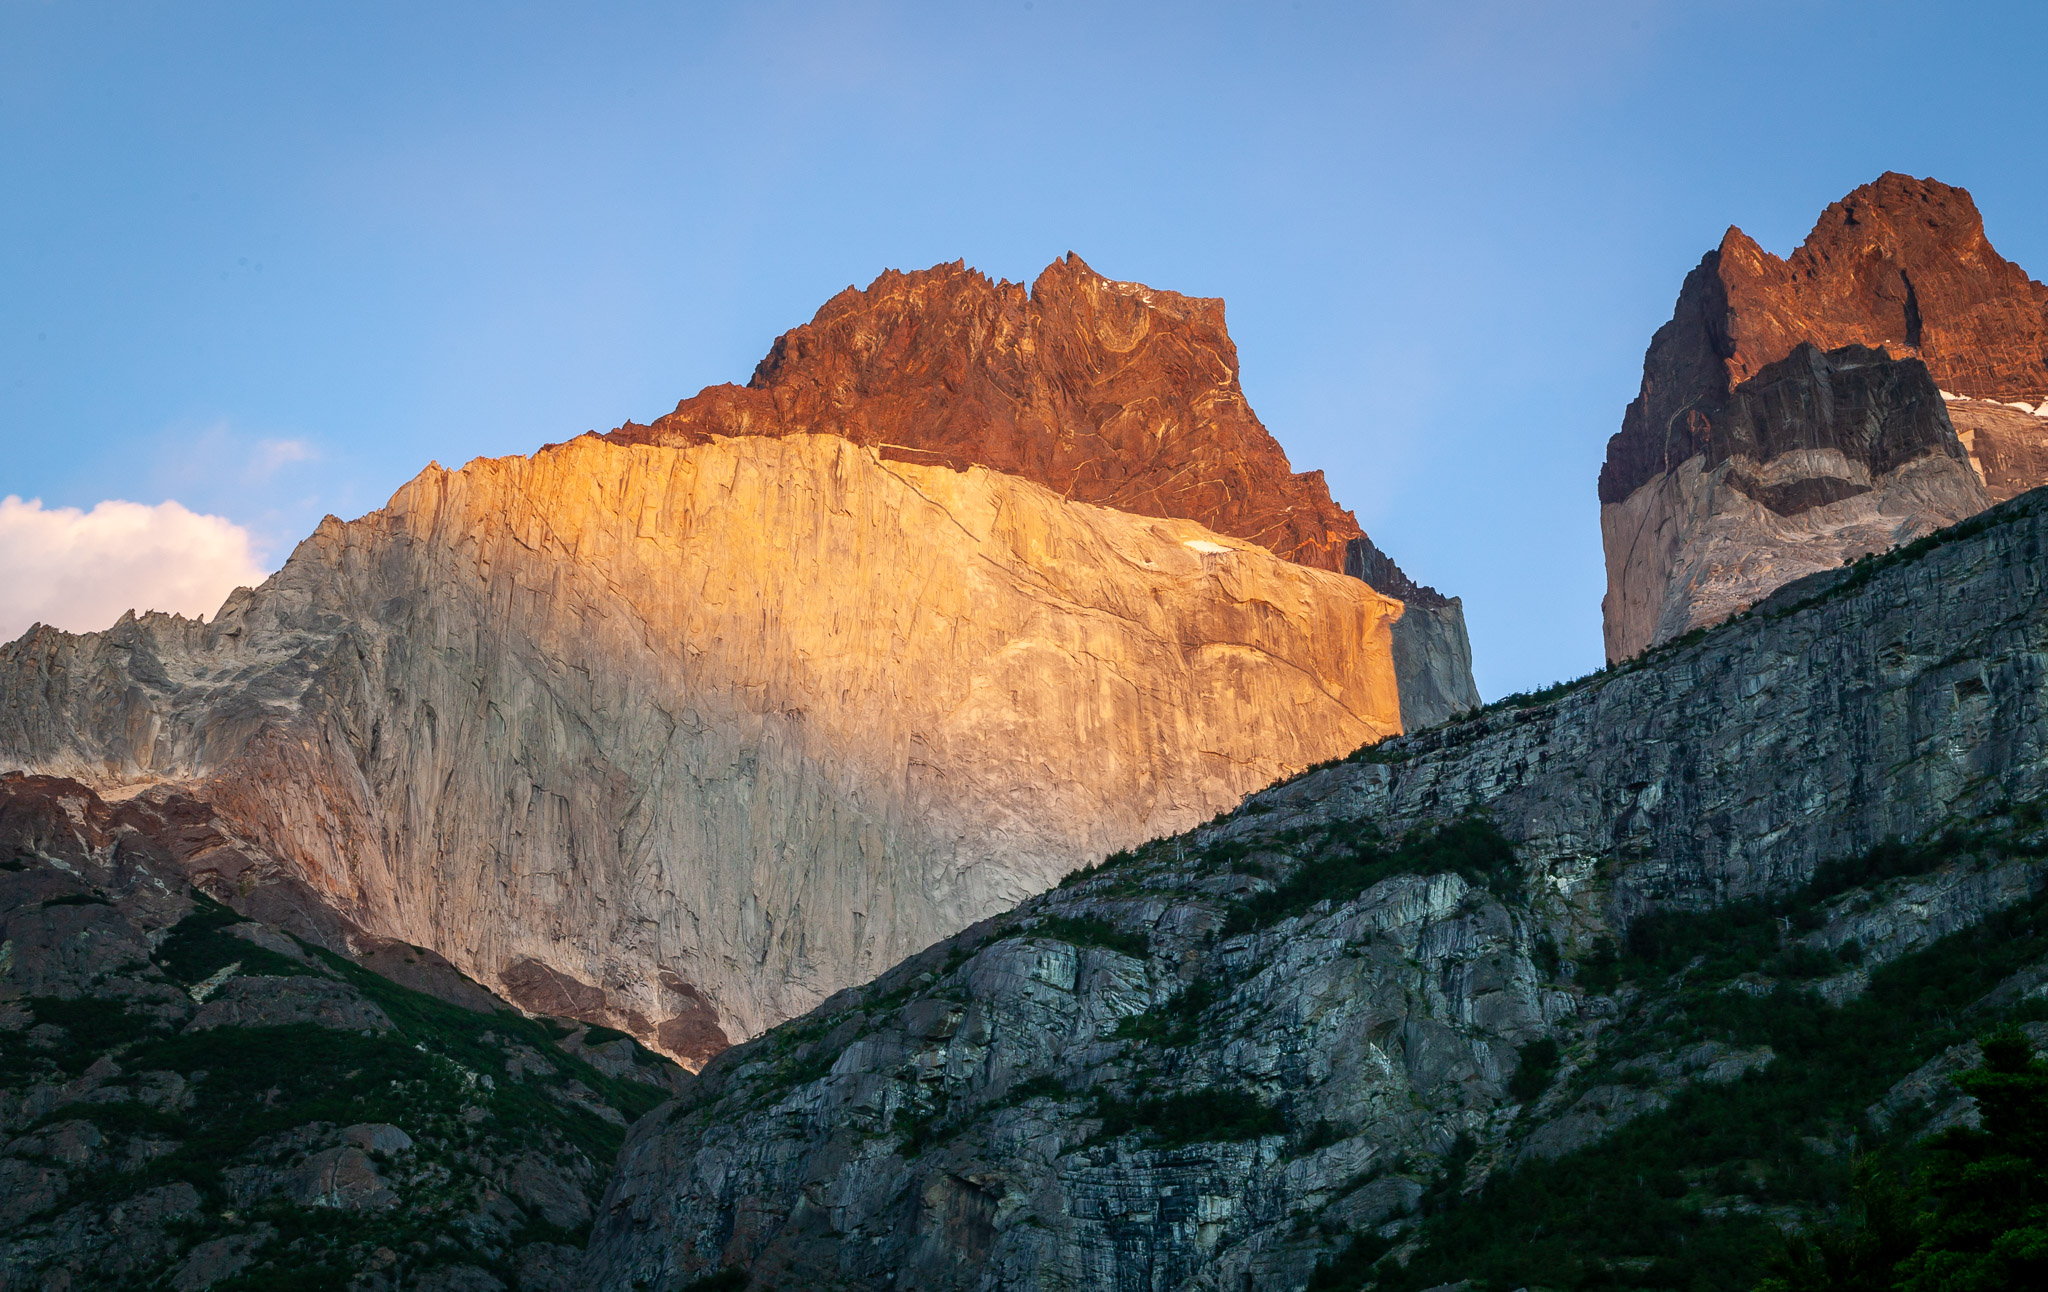 Sunset on Los Cuernos (the Horns)